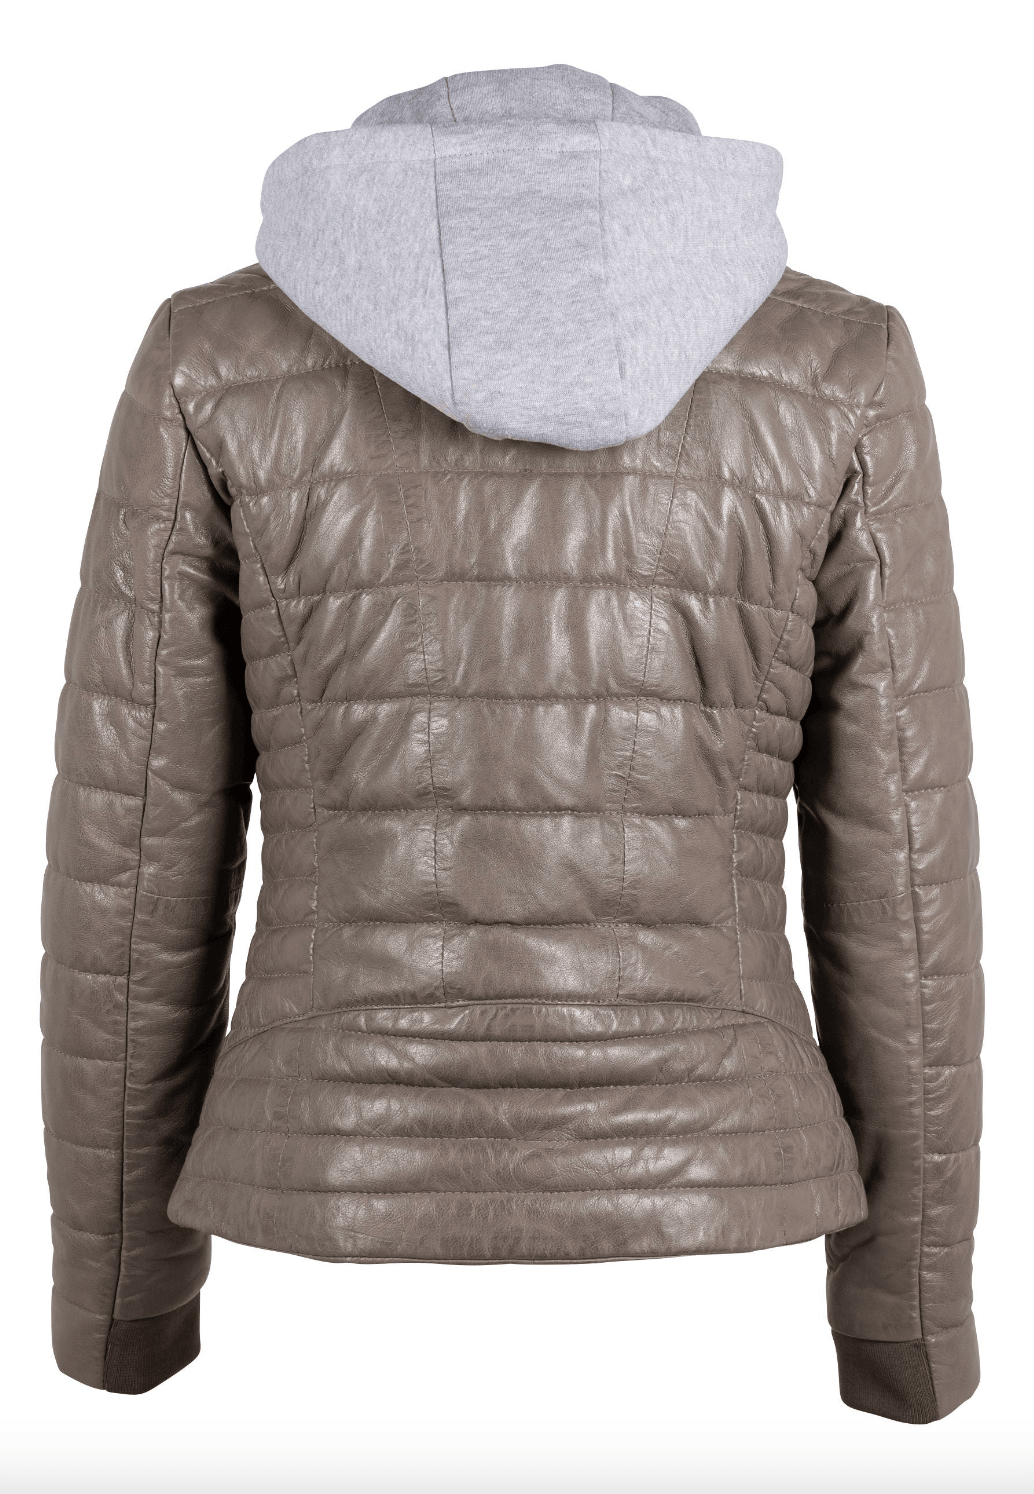 Robin Leather Jacket in Grey by Mauritius - Haven